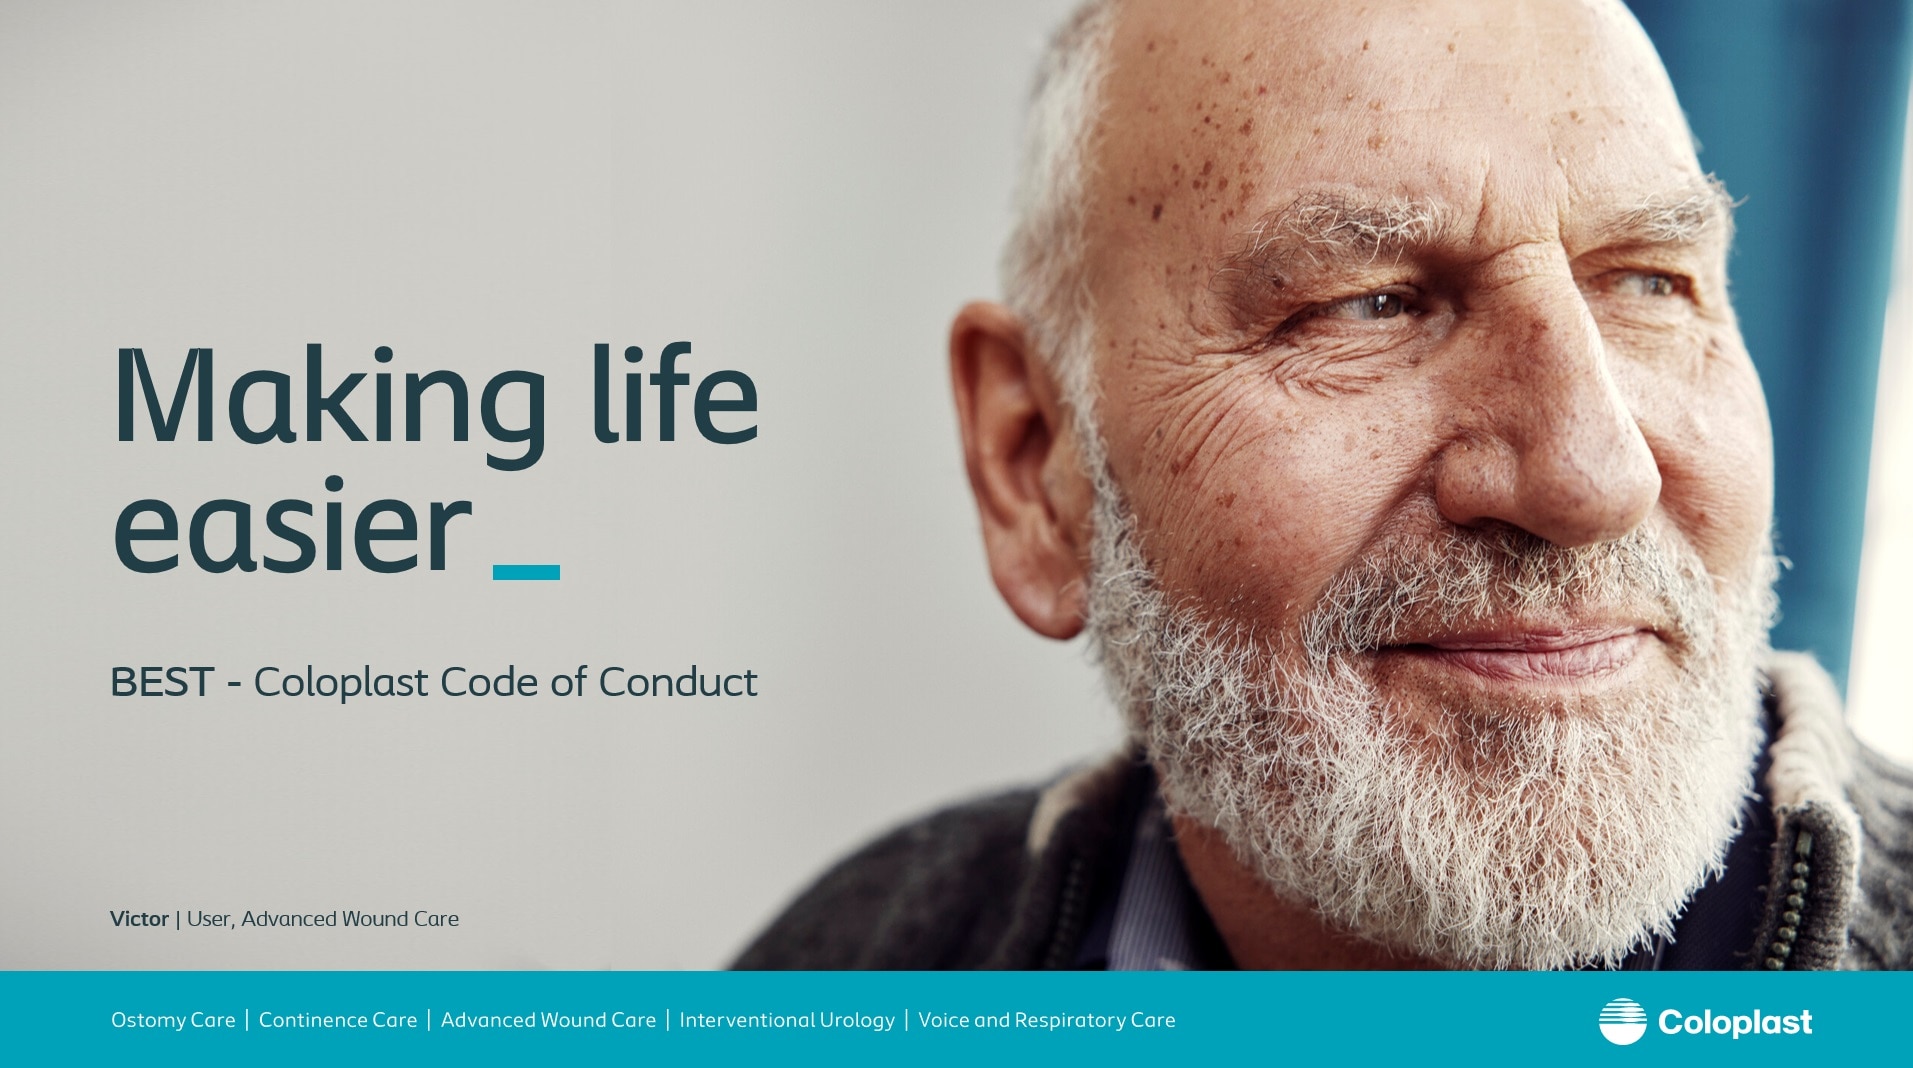 Coloplast BEST - Our Code of Conduct